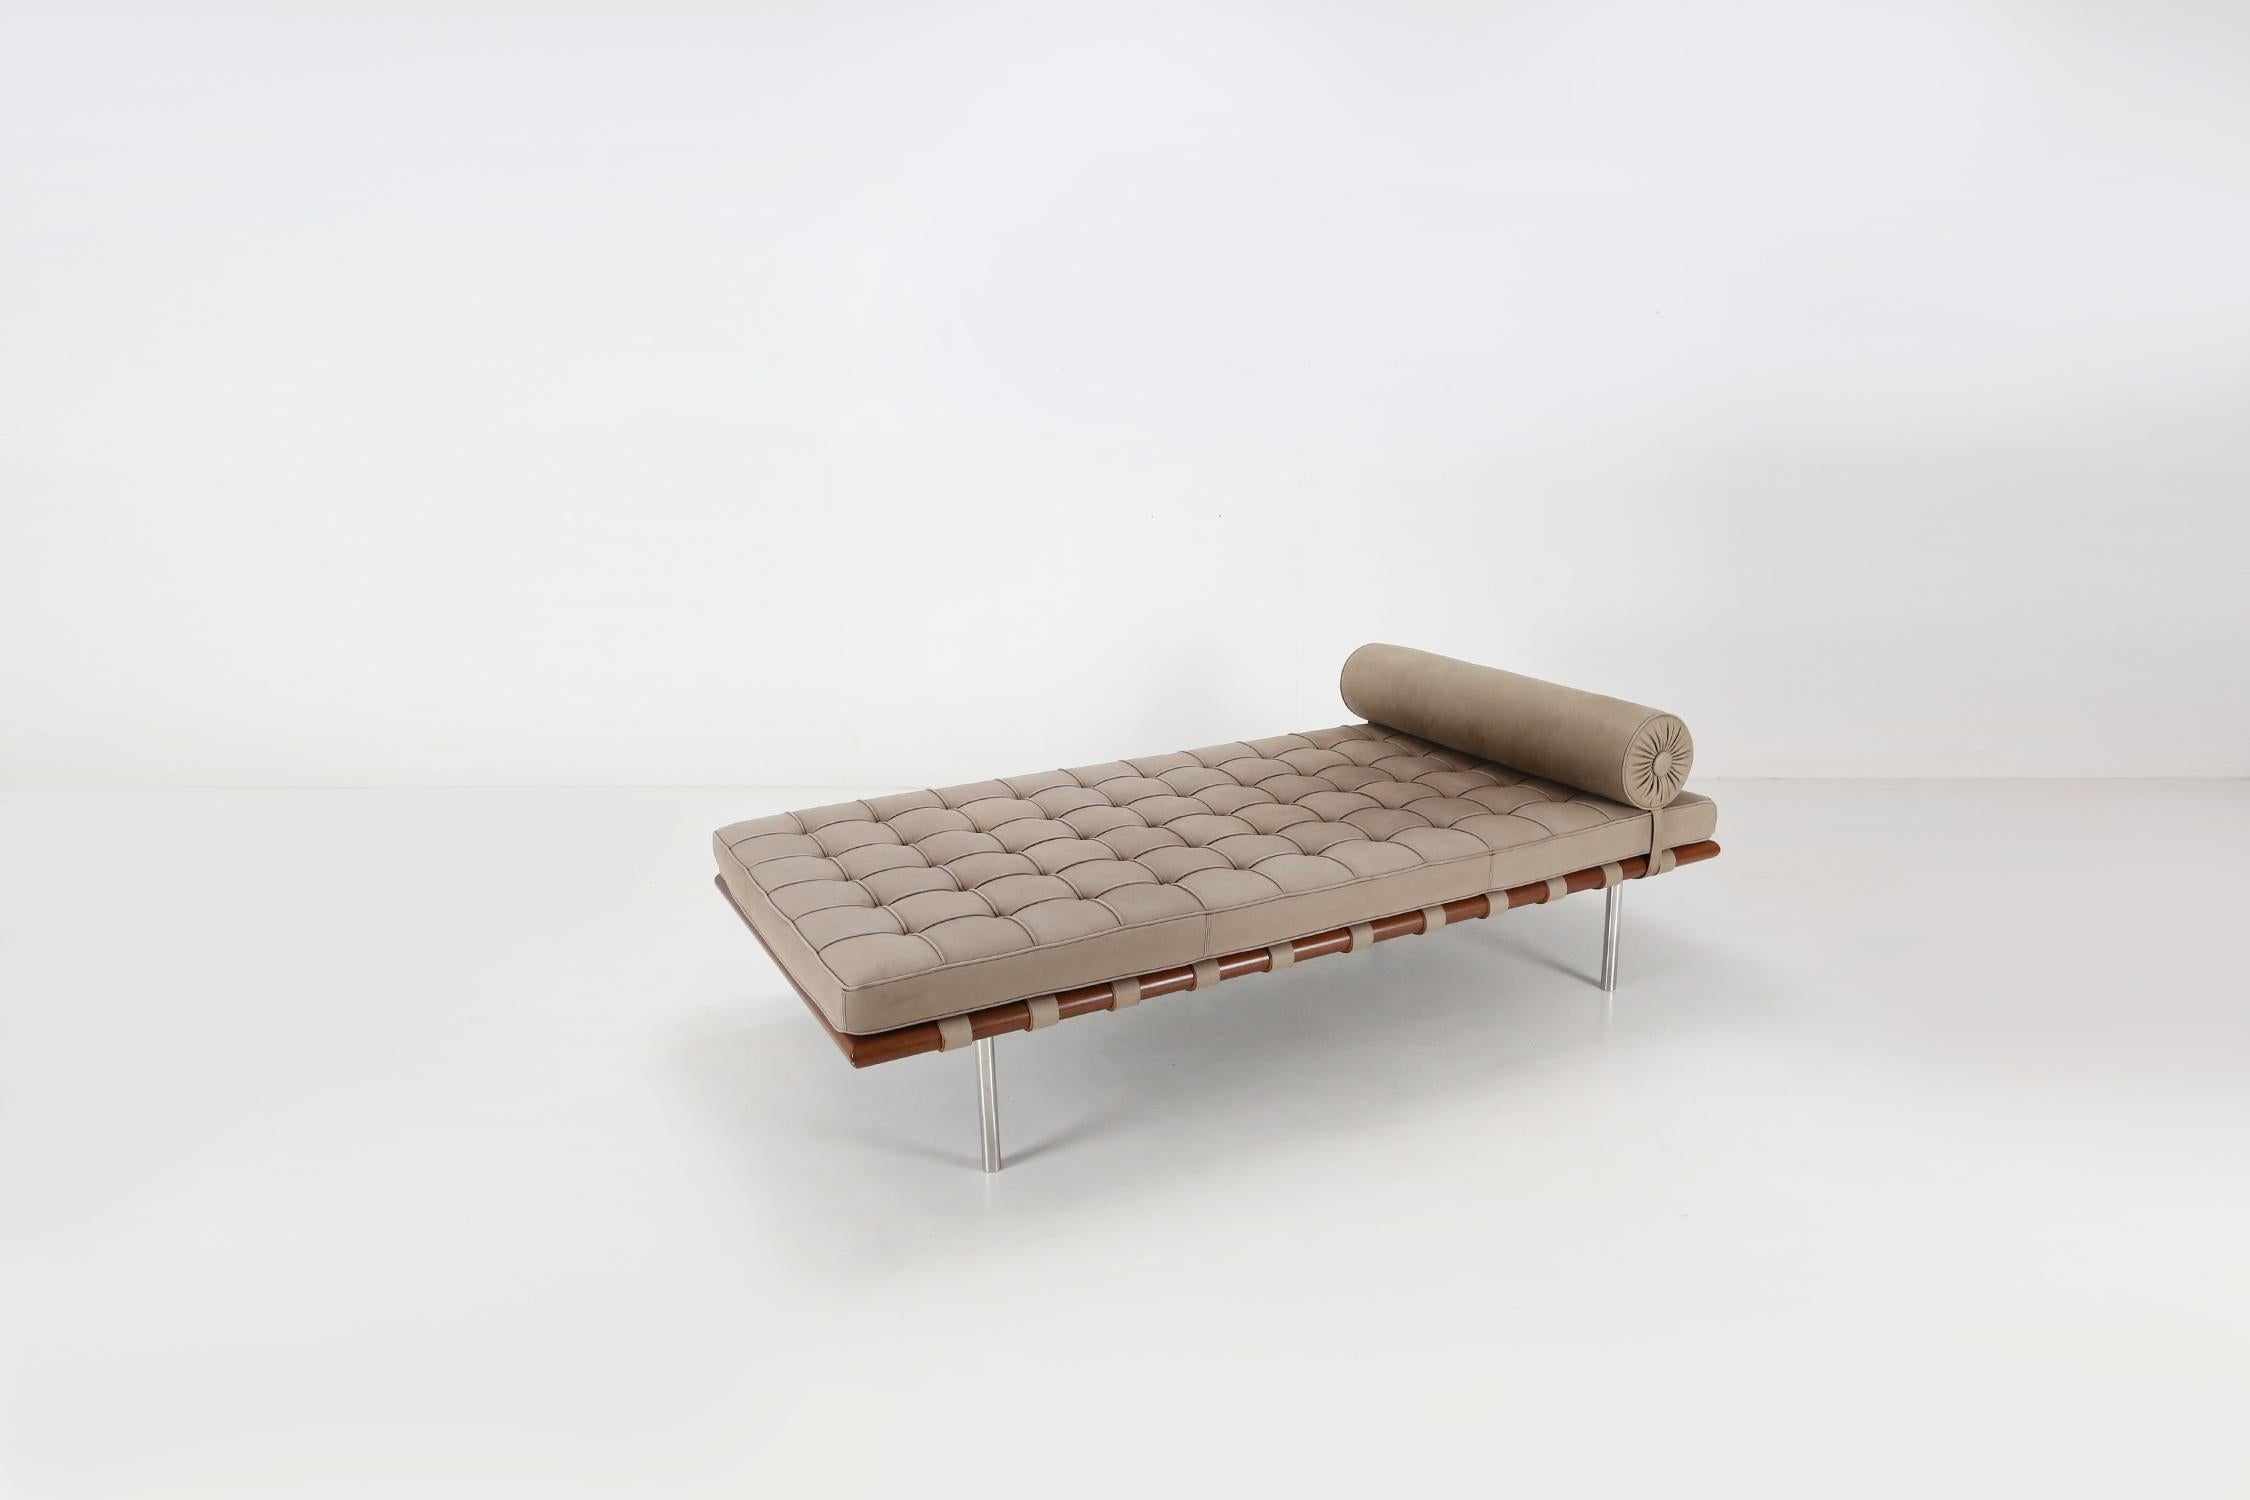 Iconic Barcelona daybed designed by Mies van der Rohe in 1930.
Made in a Mahogany frame with chrome metal feet.
The cushion is made of 72 individual panels are cut, hand-welted and hand-tufted with leather and buttons produced from a single